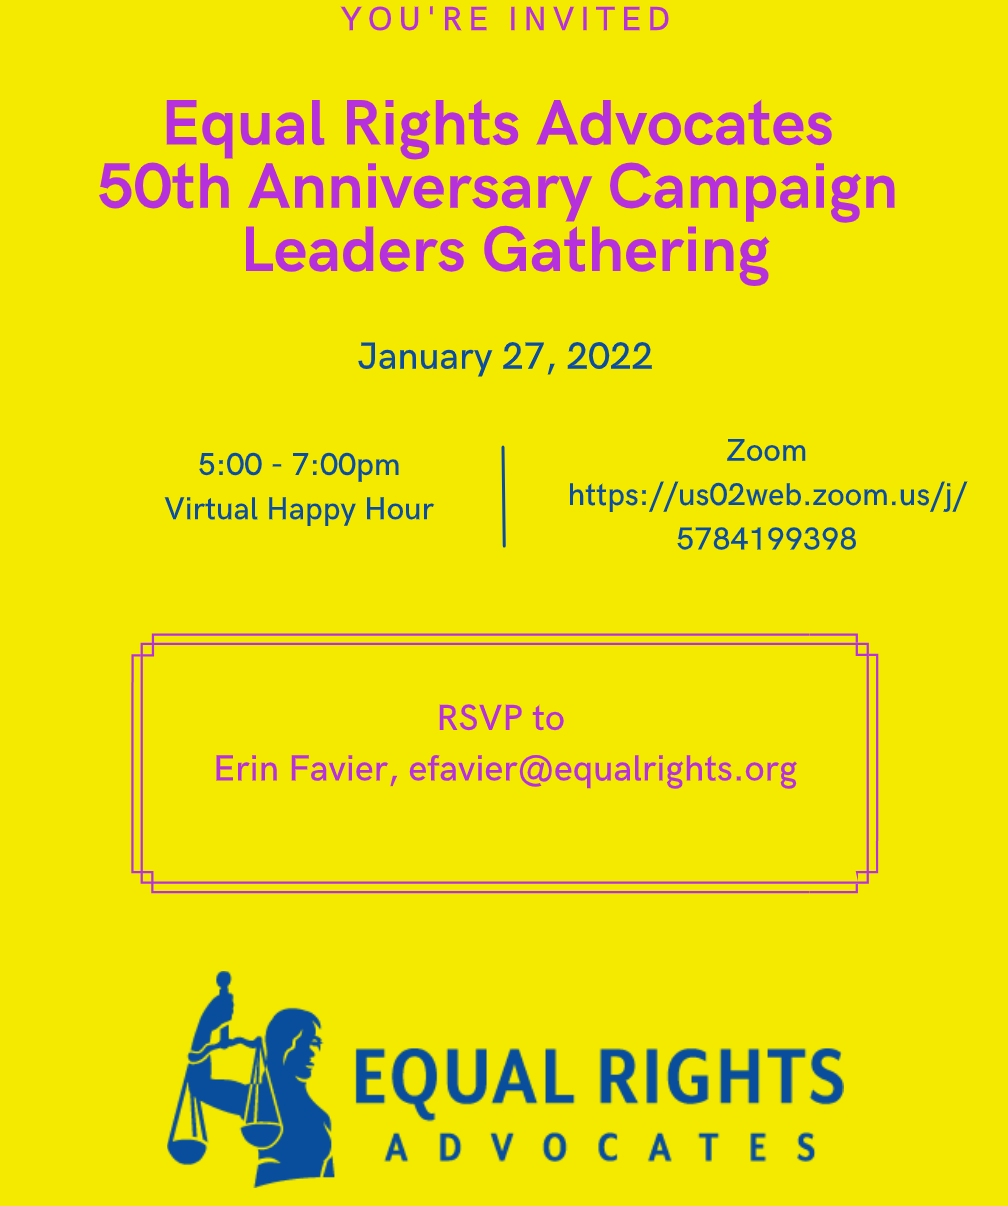 Equal Rights Advocates 50th Anniversary Campaign Leaders Gathering